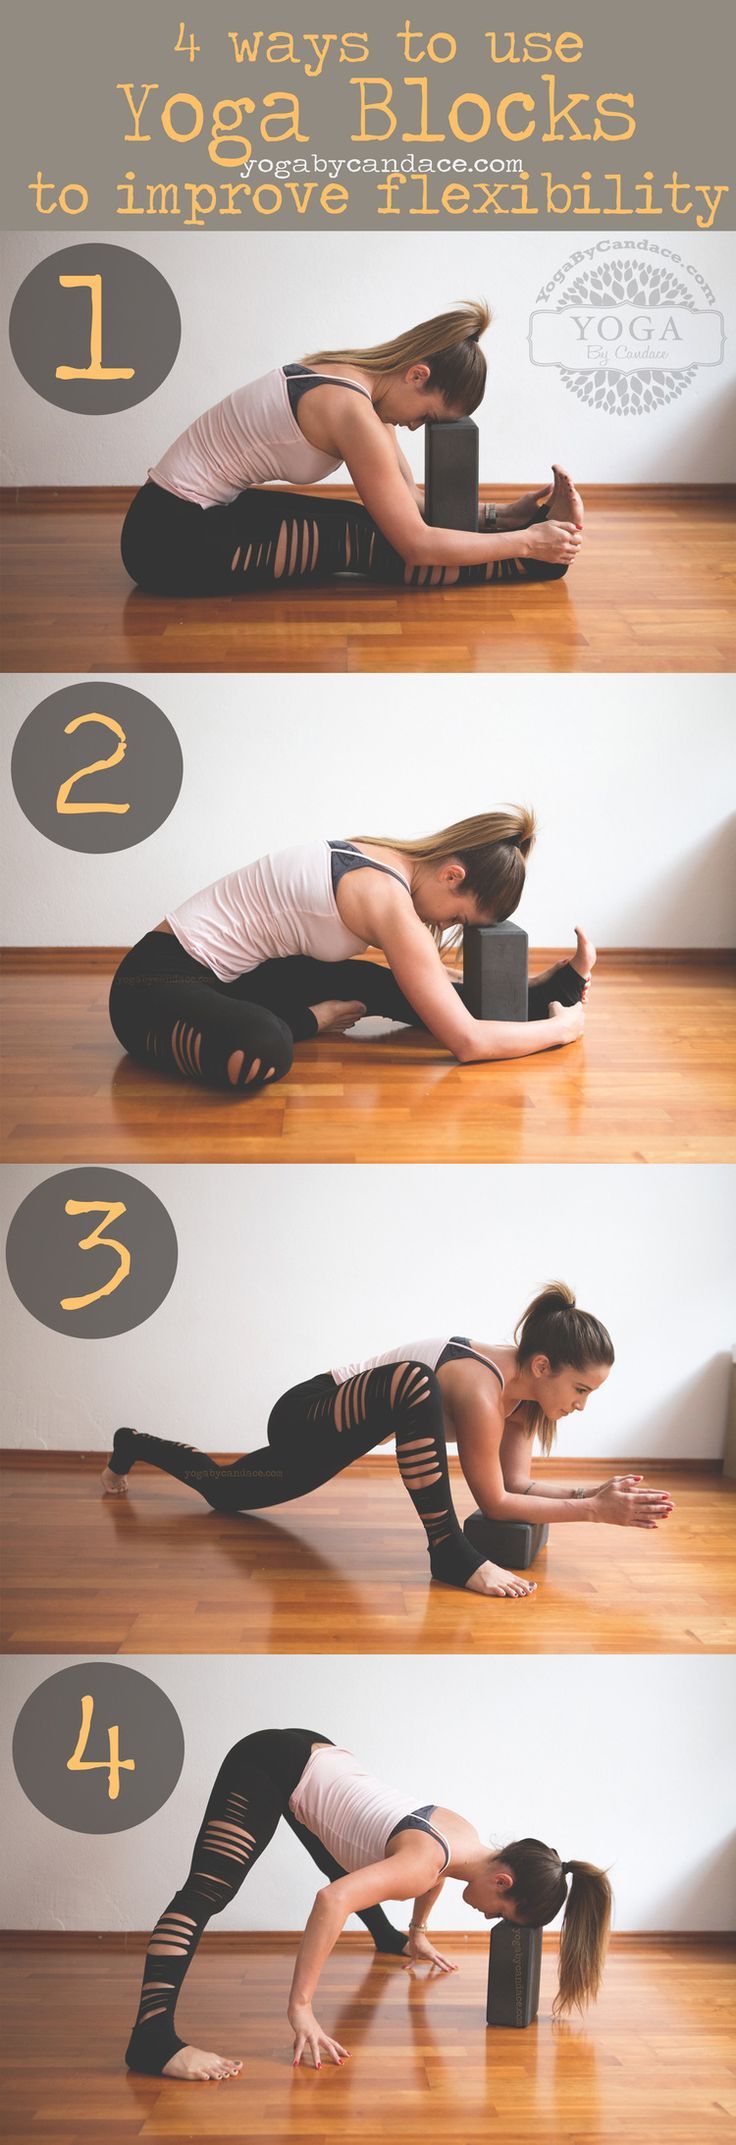 Pin now, practice later! 4 ways to use yoga blocks to improve your flexibility W...